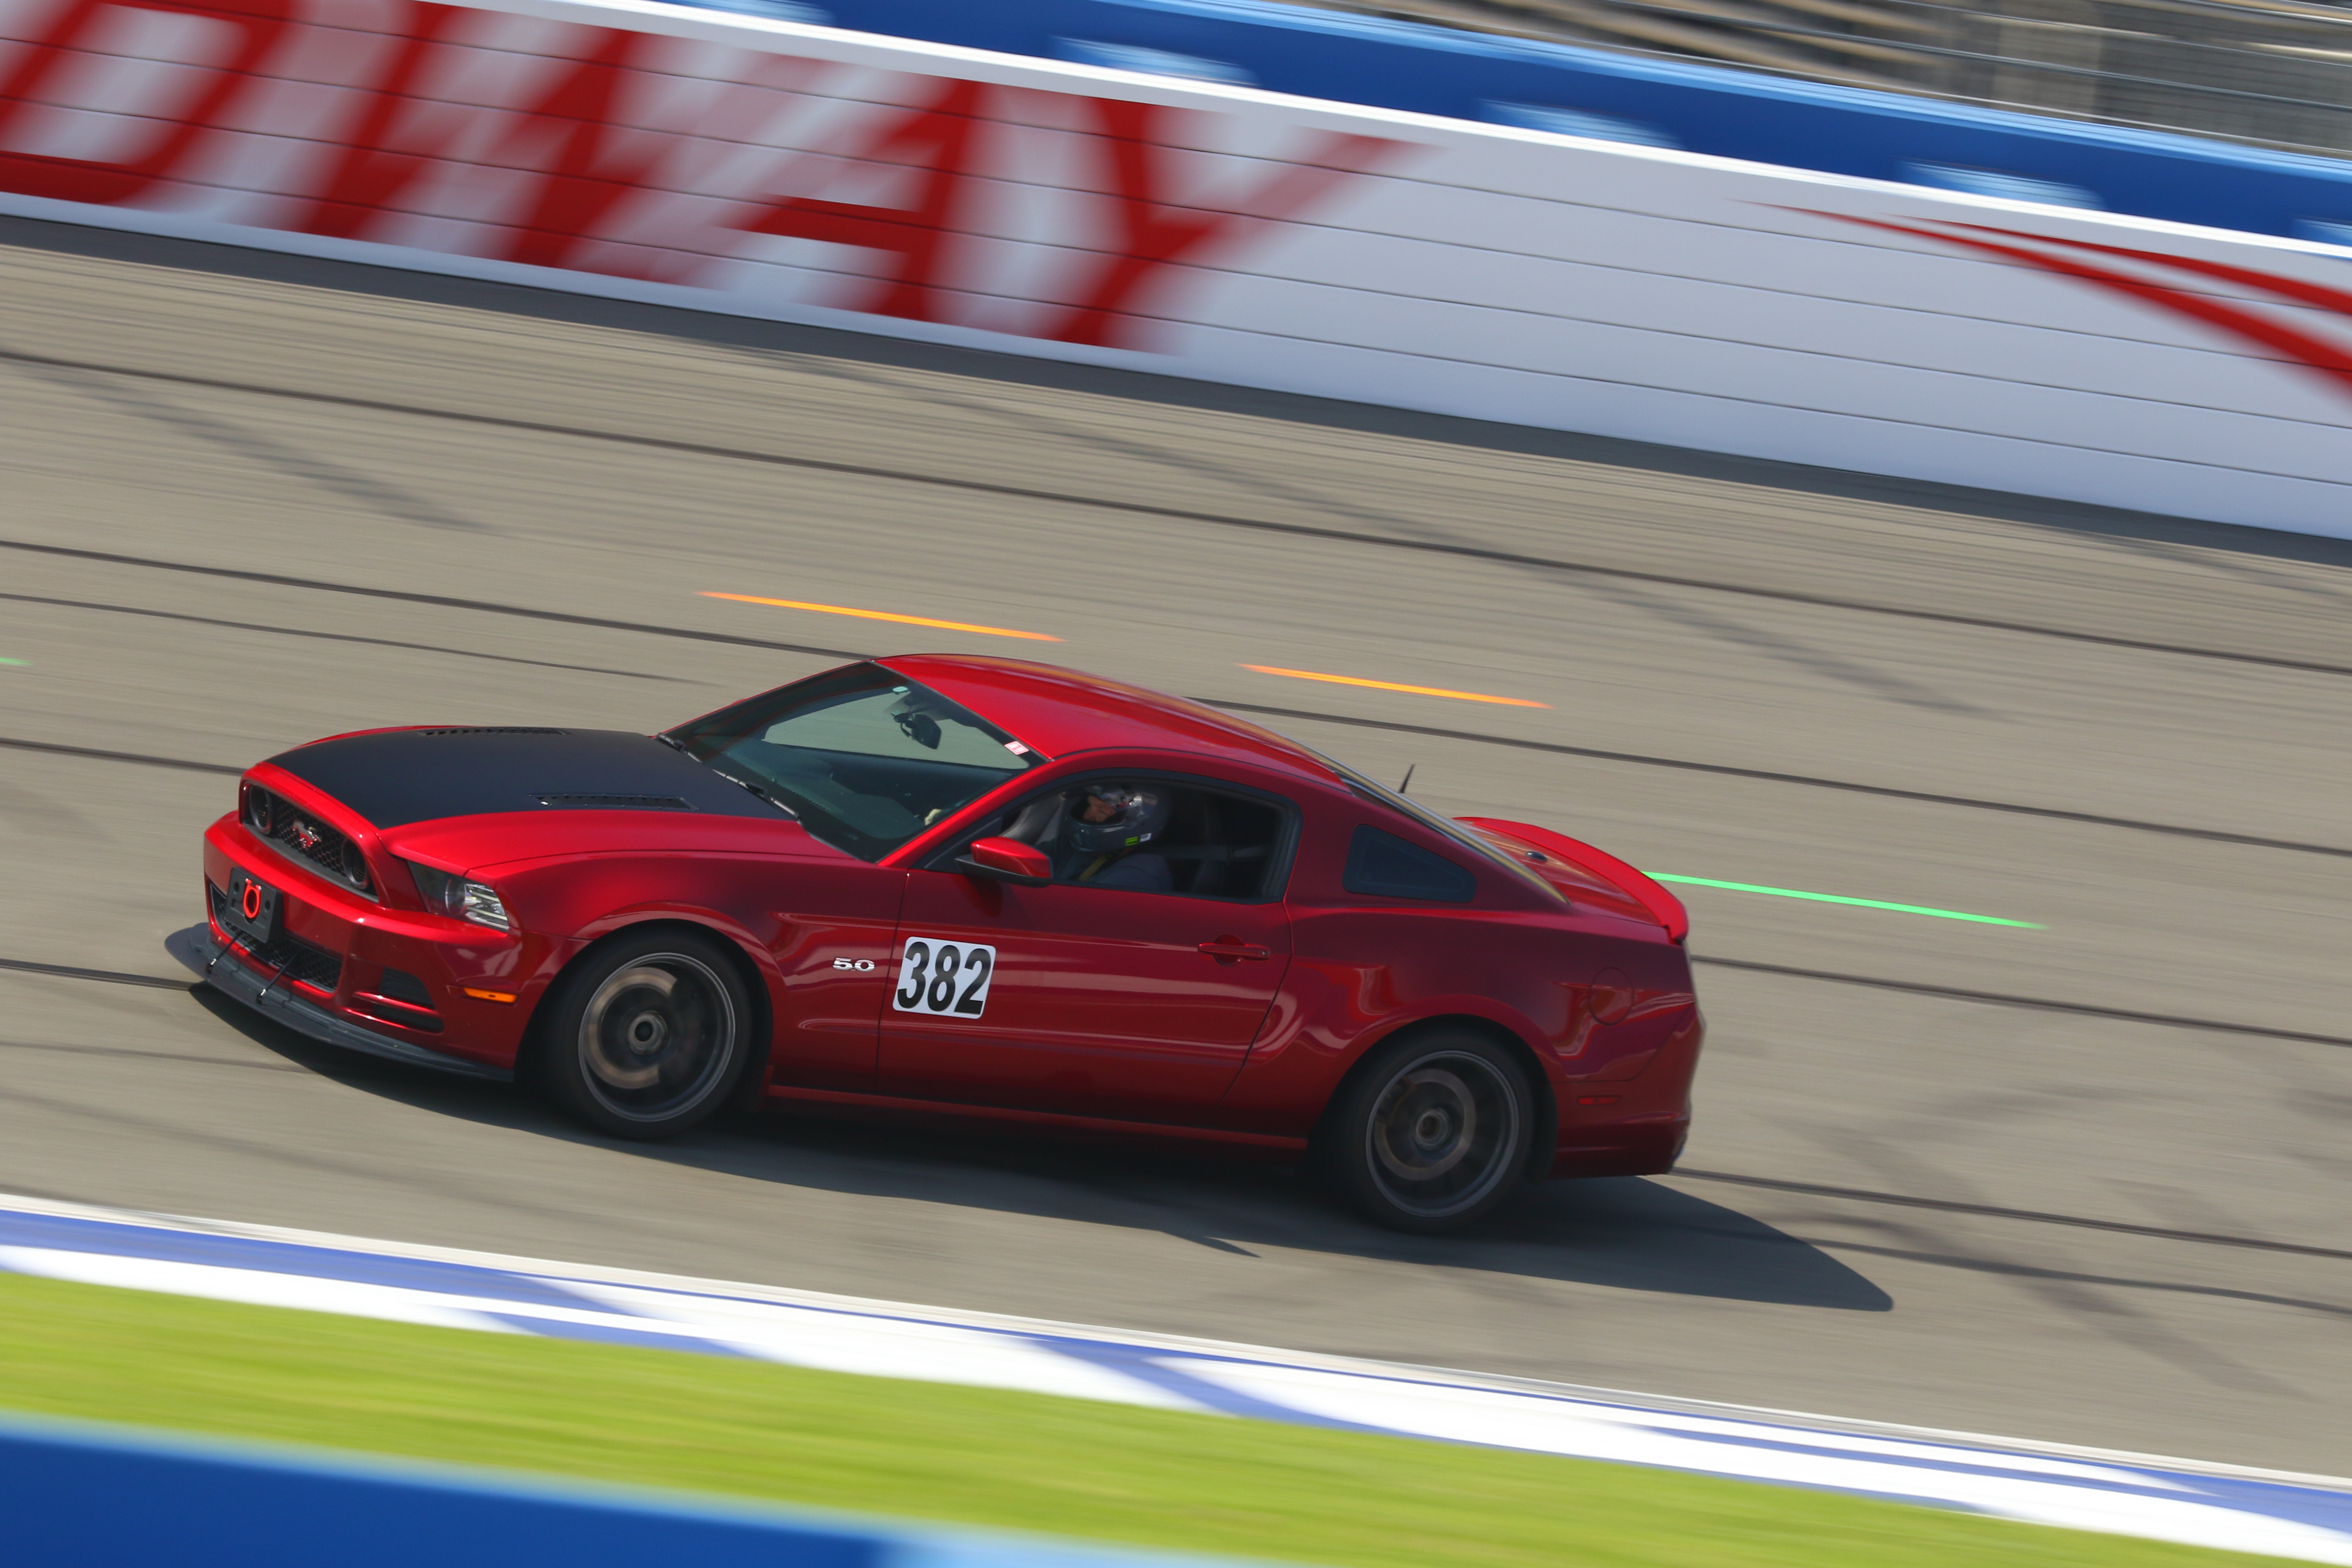 2014 Mustang
GT_50L HPDE/Track -  (Project 395 Mustang GT)